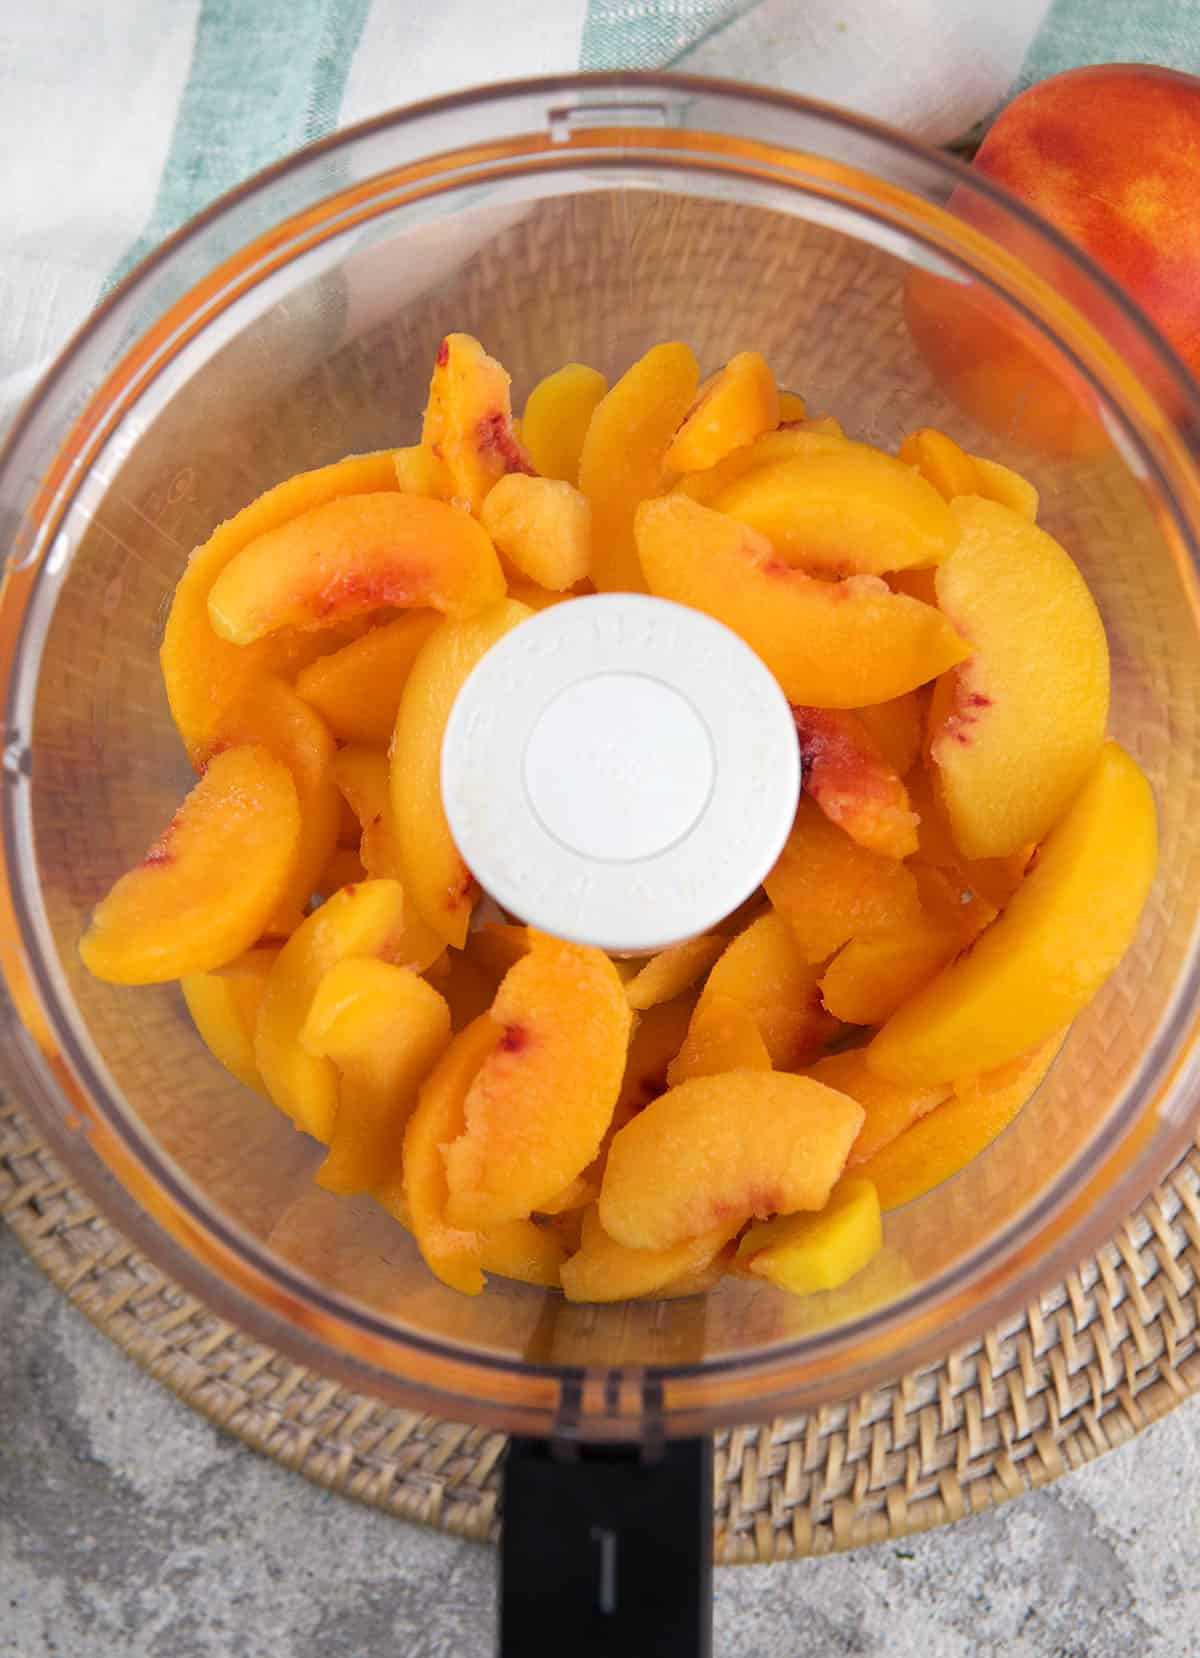 Peaches are placed in the bowl of a food processor.